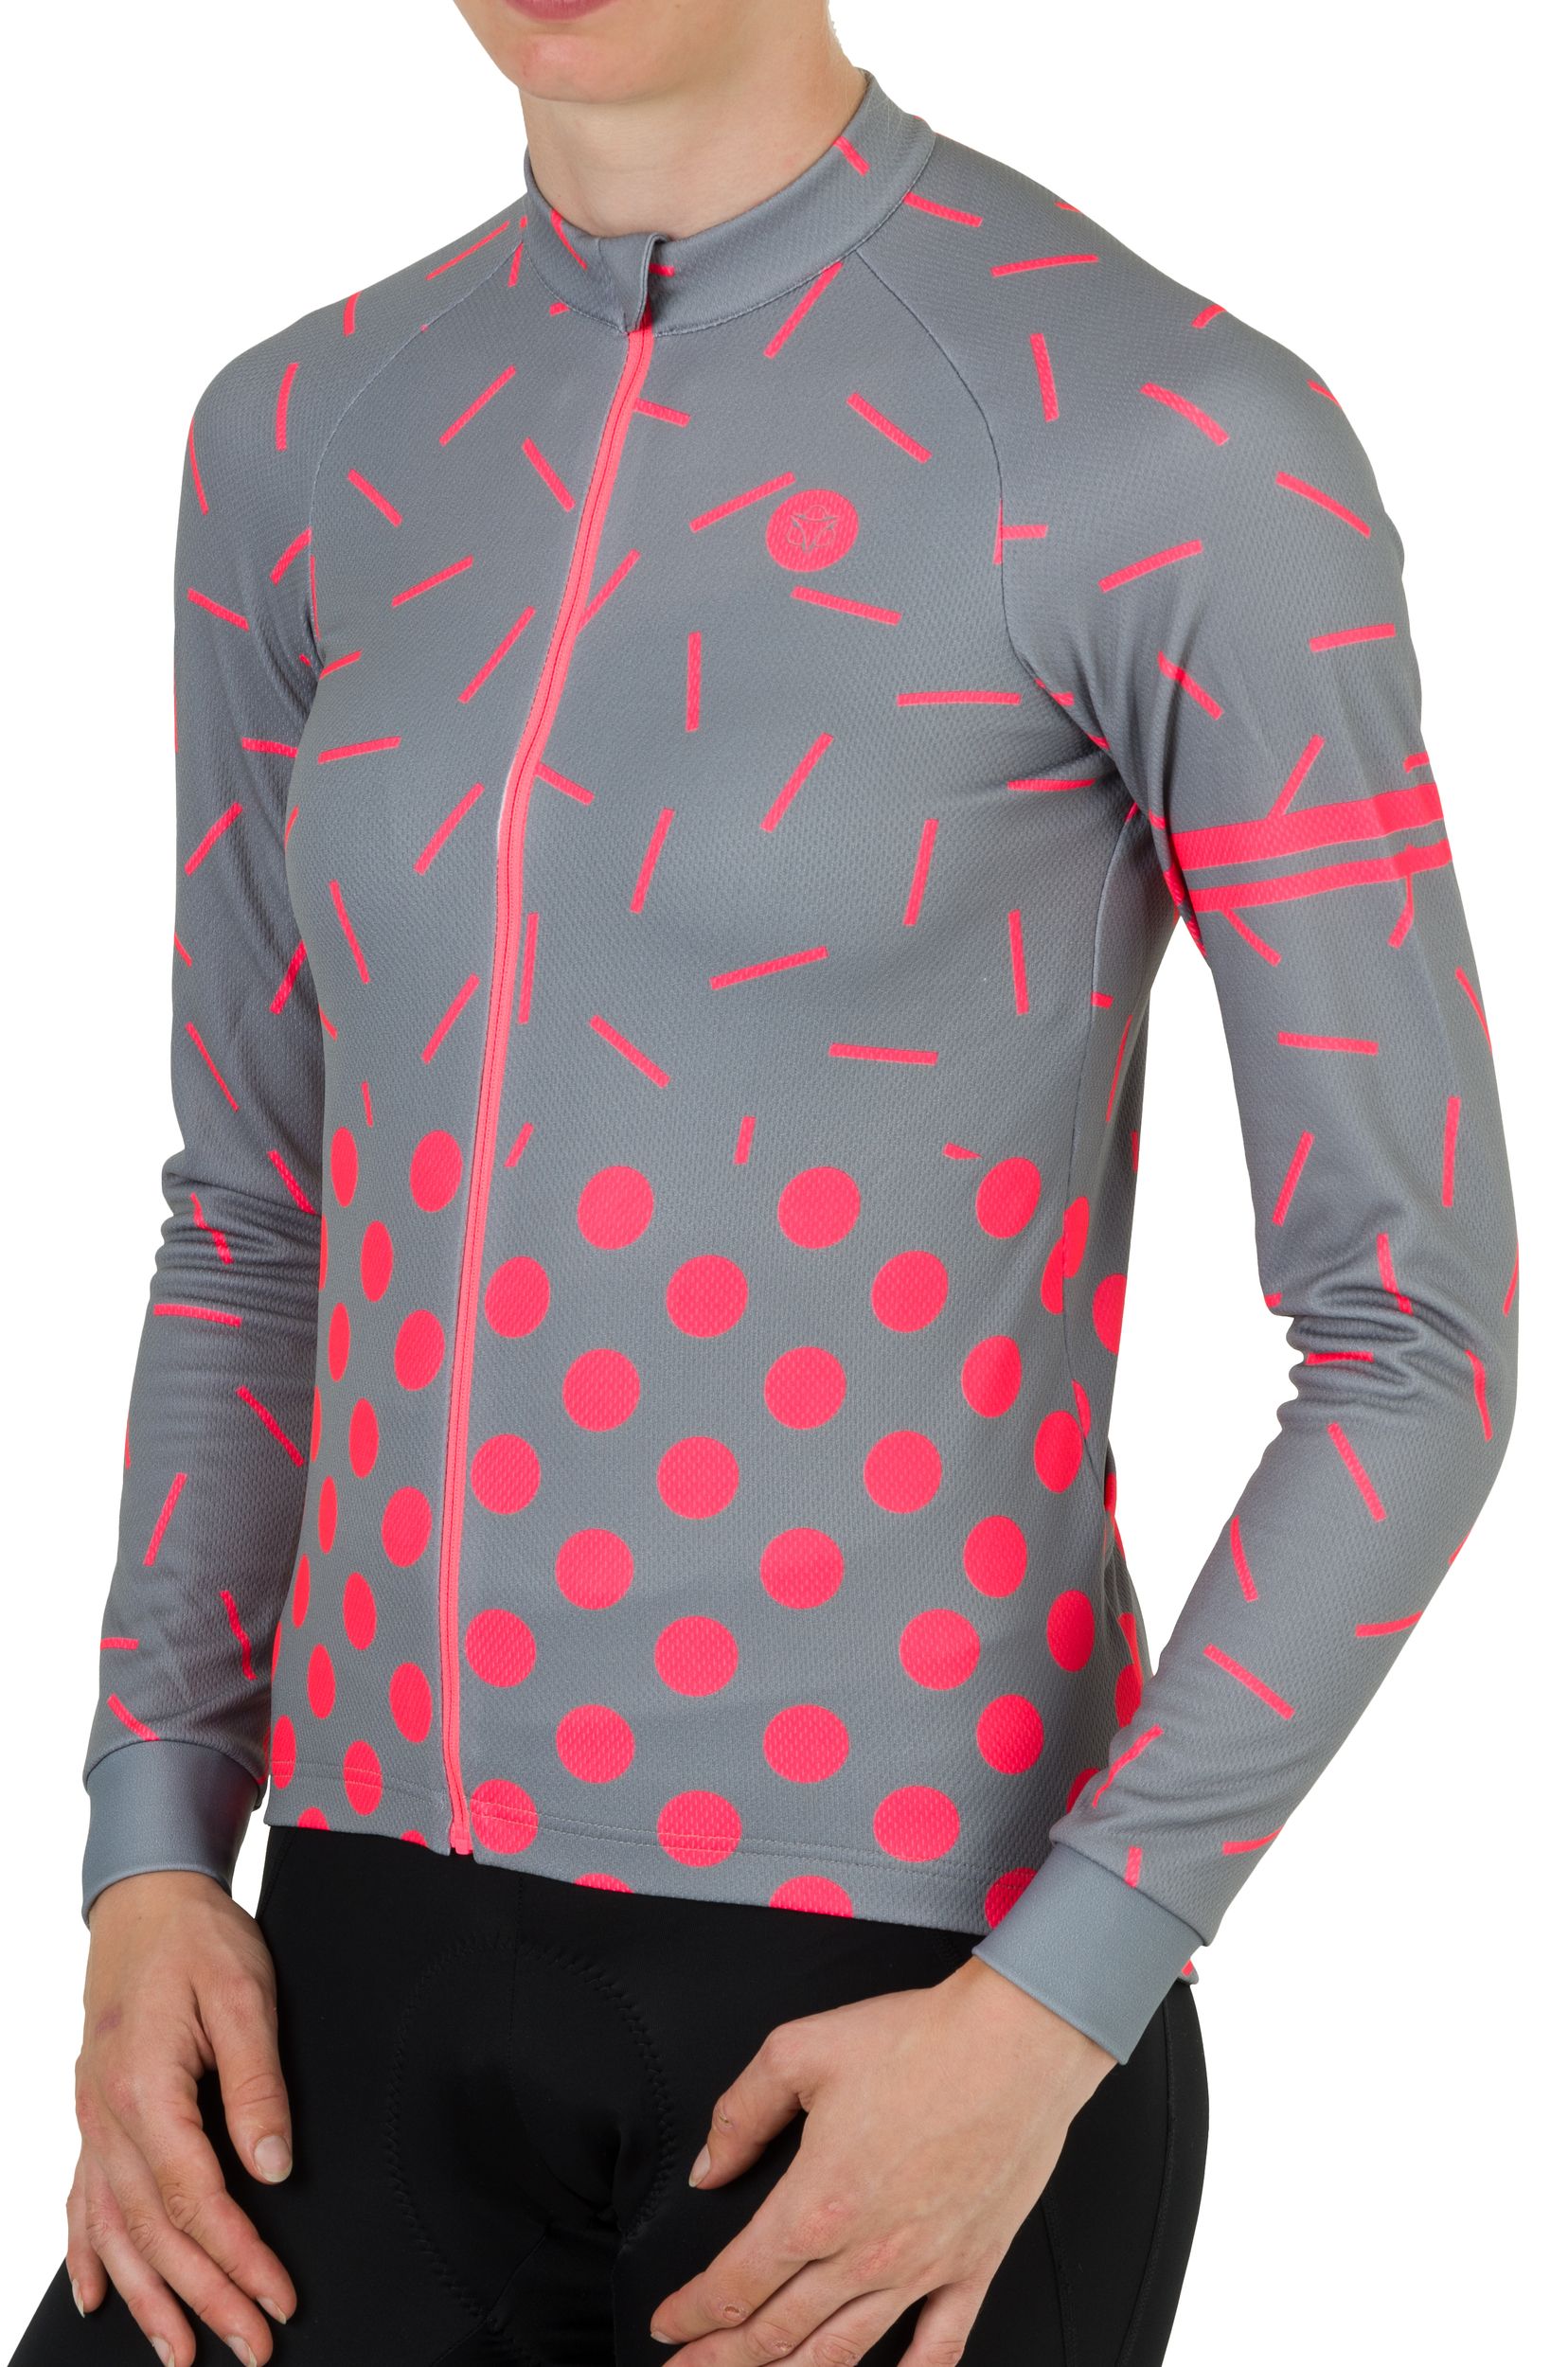 Sprinkle Dot Jersey LS Essential Women fit example